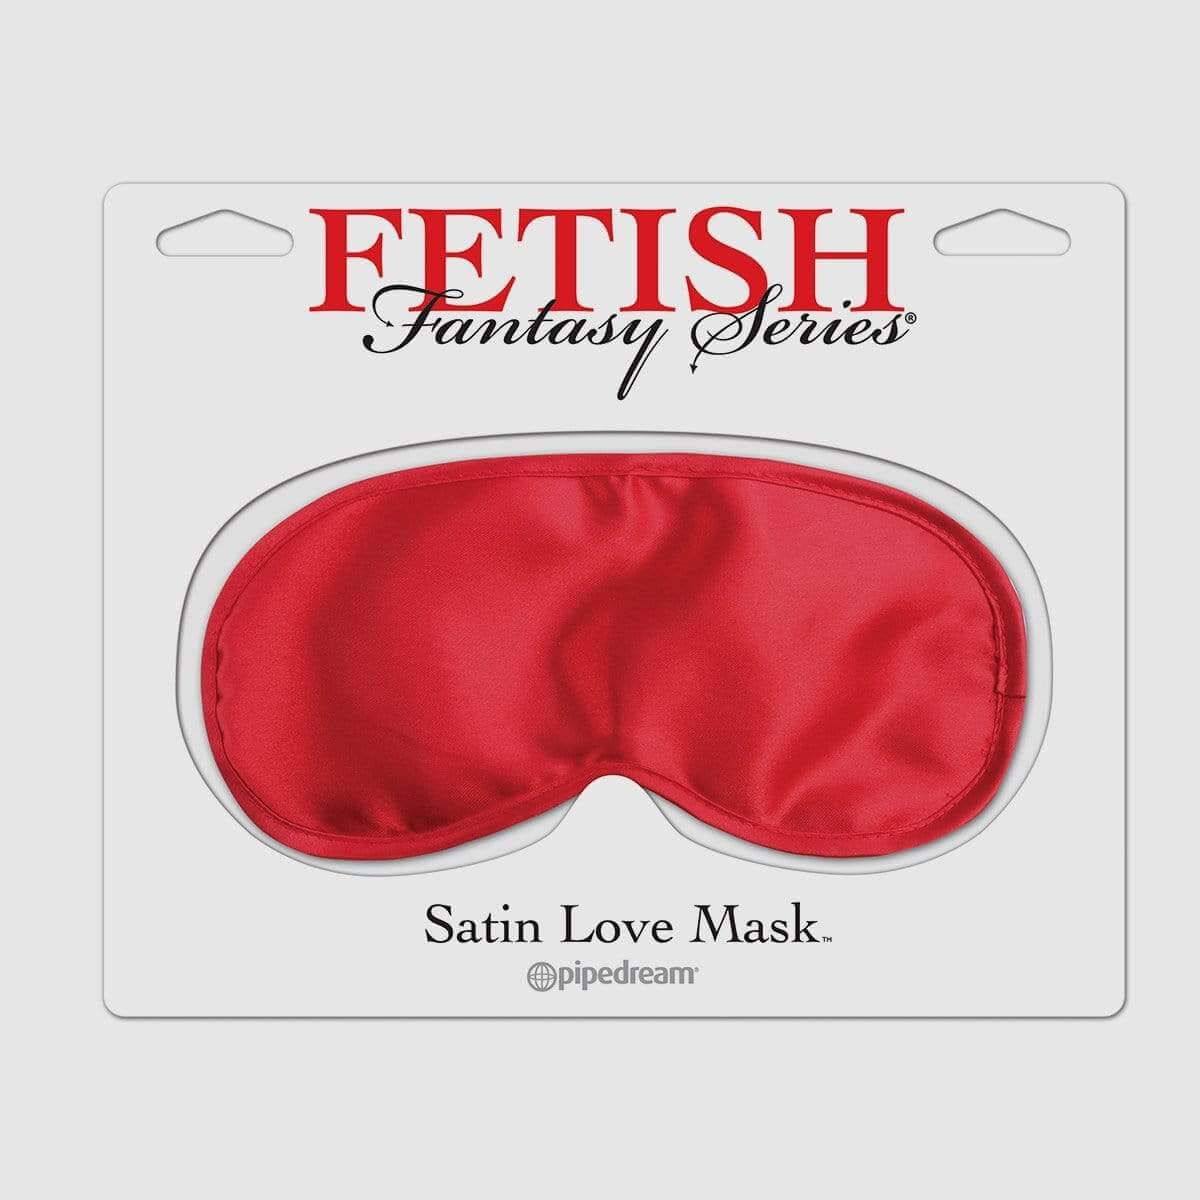 Fetish Fantasy Series Satin Love Mask - Red - Thorn & Feather Sex Toy Canada